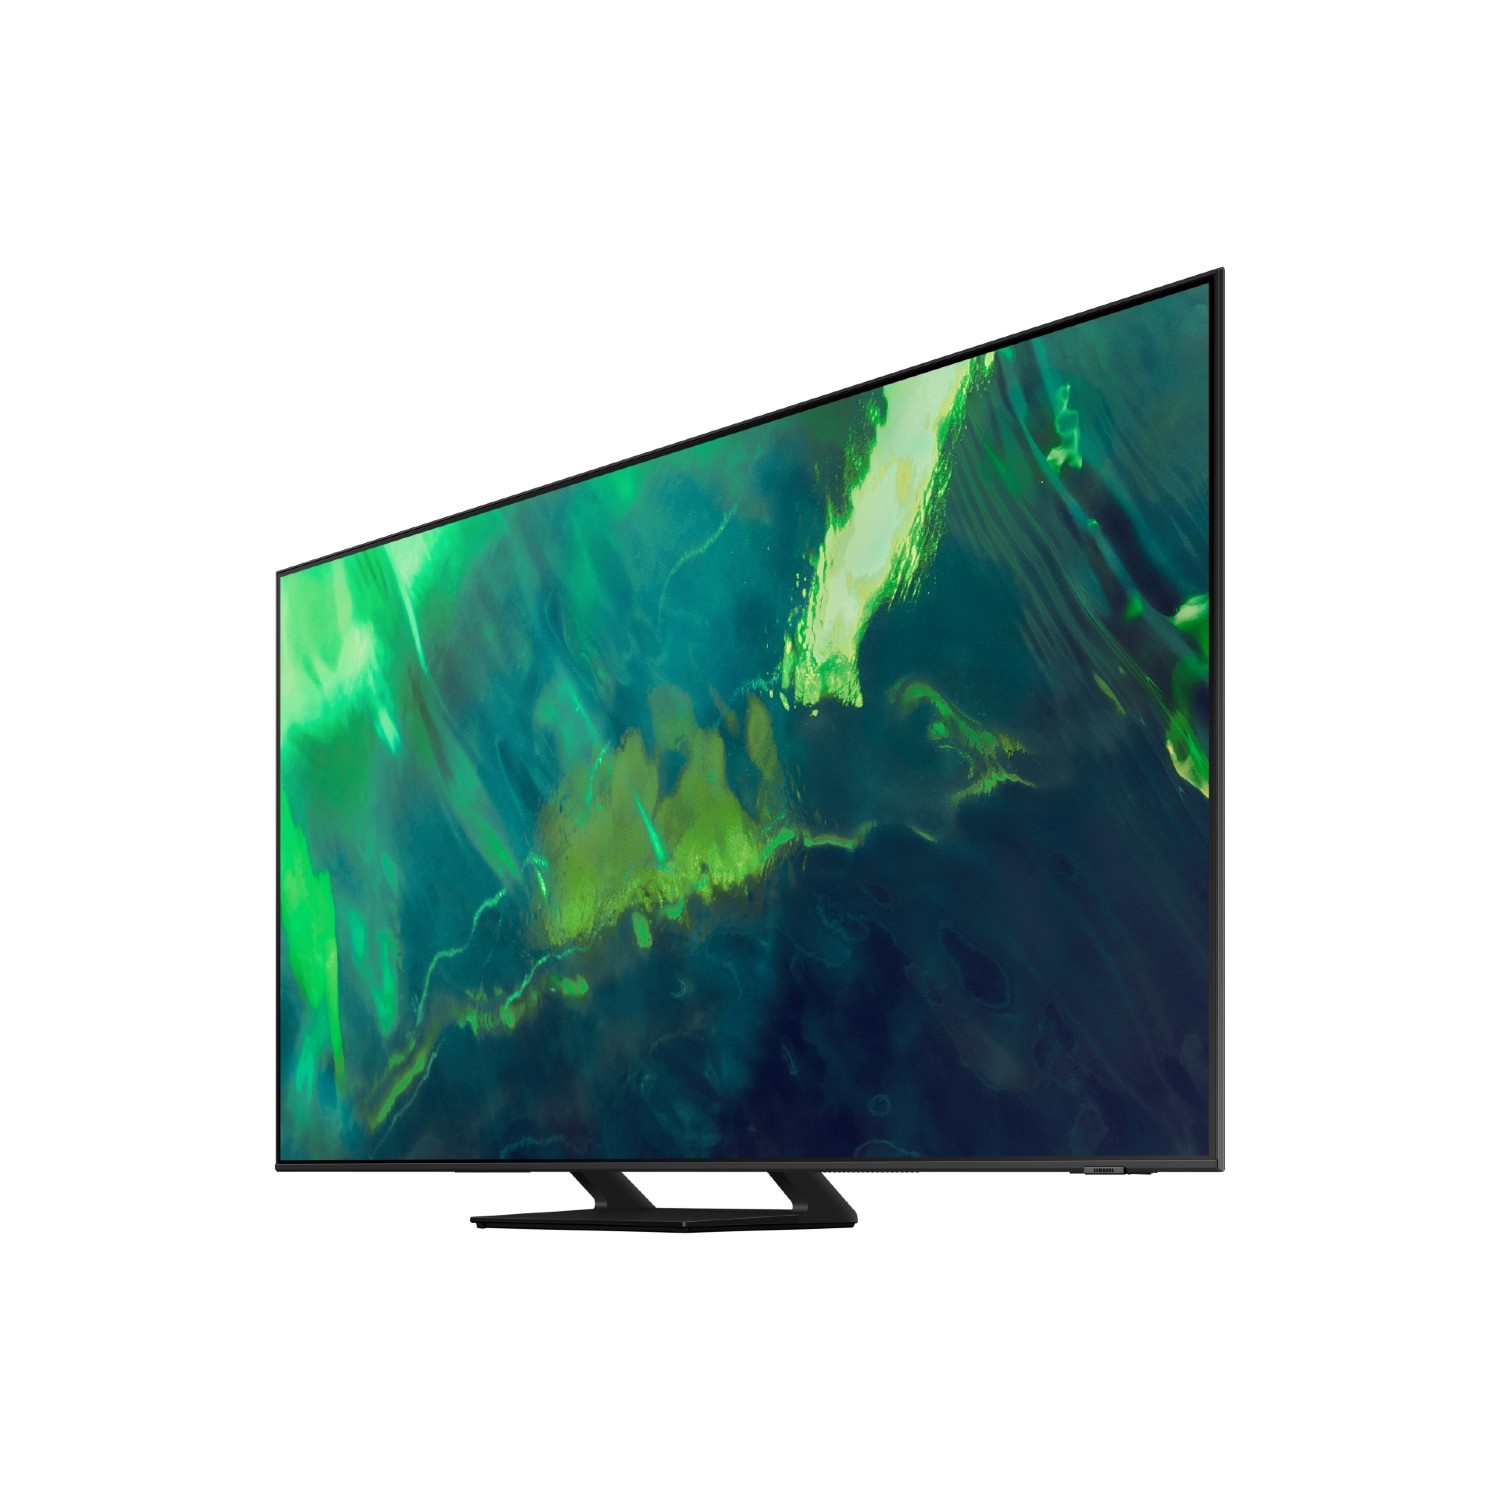 Samsung QE55Q70AATXXU 55" 4K QLED Smart TV Quantum HDR powered by HDR10 + 4K picture with AI sound. - 6